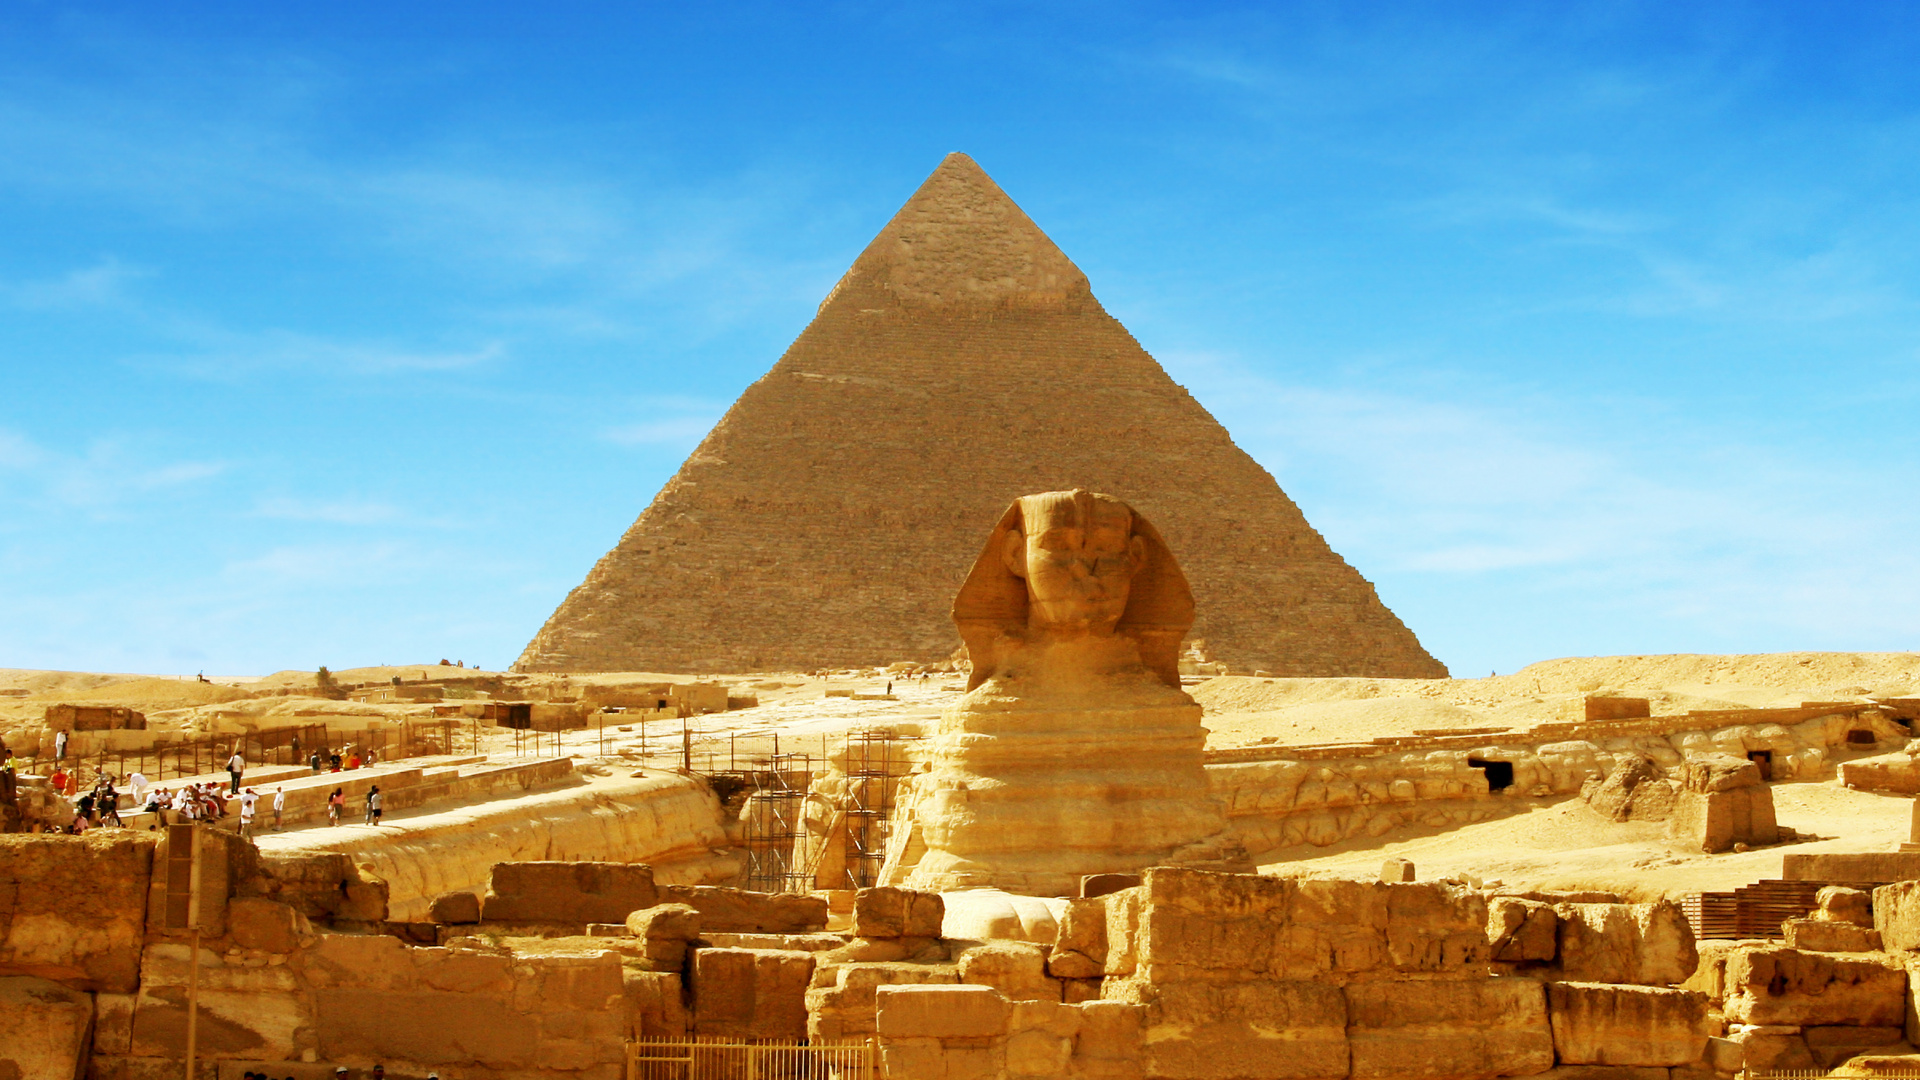 Pyramid of Giza Under Blue Sky During Daytime. Wallpaper in 1920x1080 Resolution